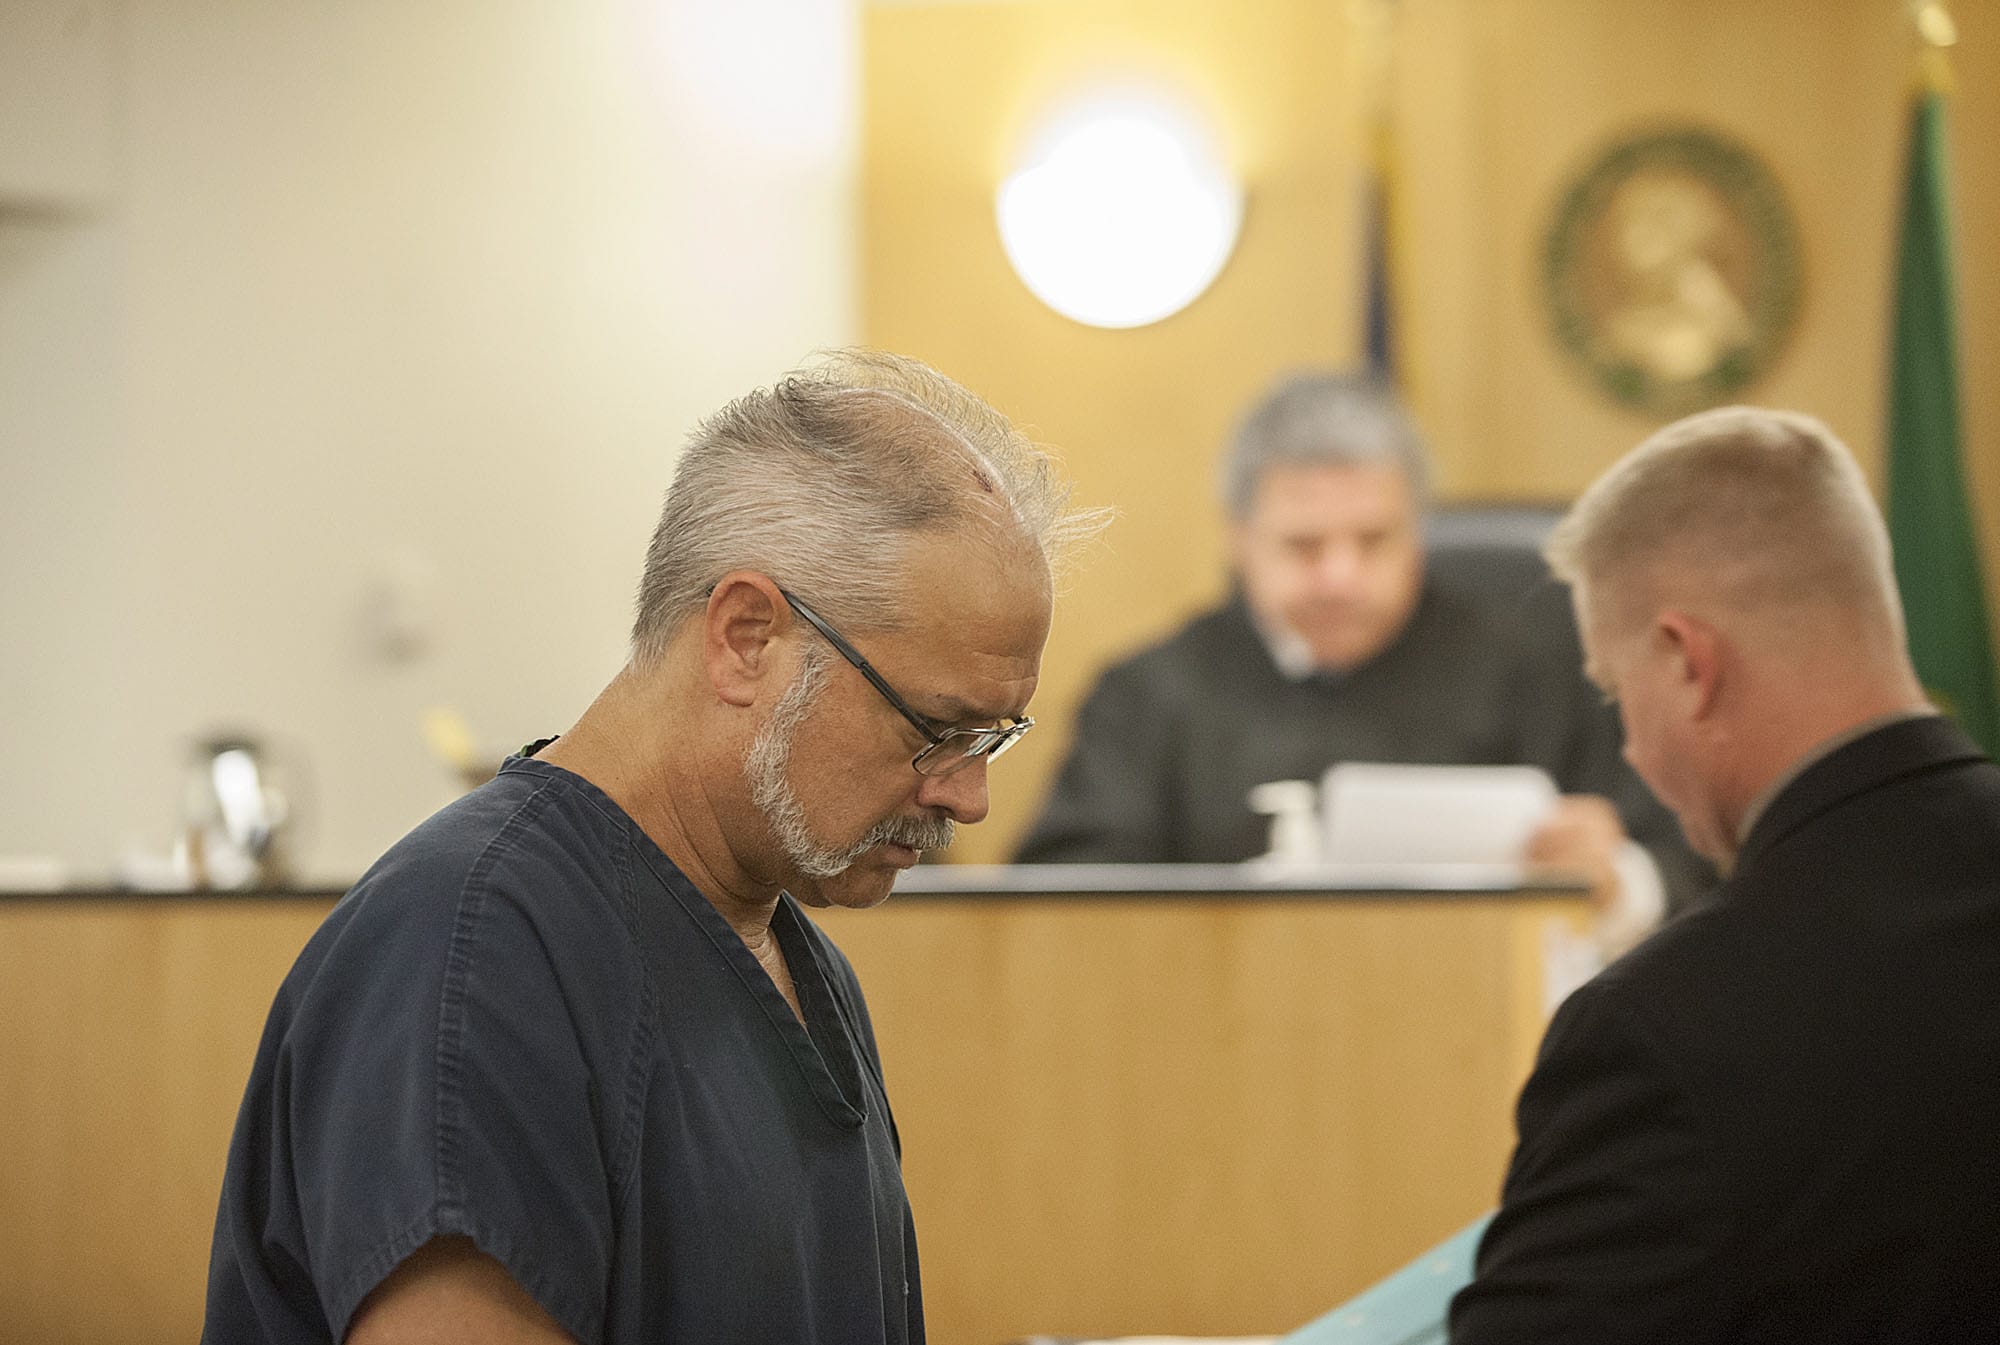 David Kadow makes a first appearance May 26 in Clark County Superior Court after allegedly dragging his dog behind his pickup, killing the animal. Kadow will not face a felony animal cruelty charge. It's possible he could face charges in District Court.